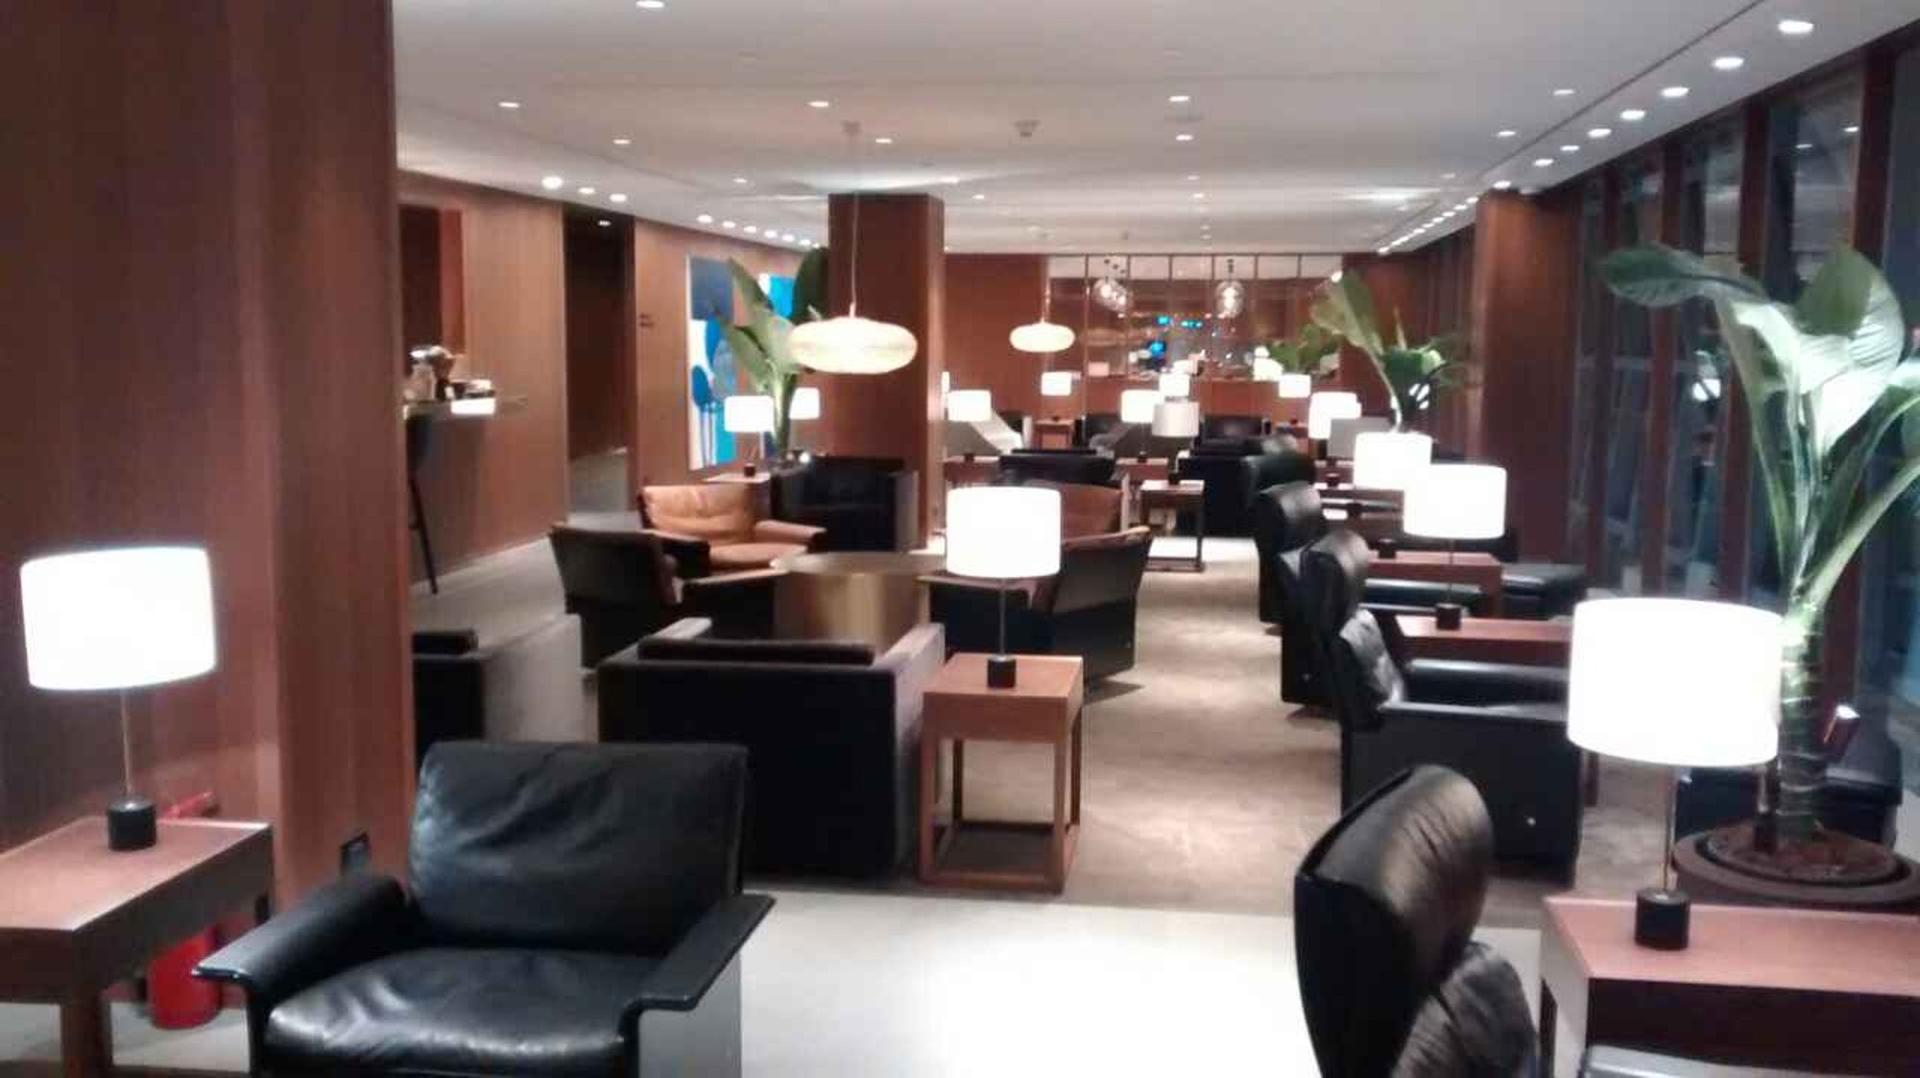 Cathay Pacific First and Business Class Lounge image 42 of 69